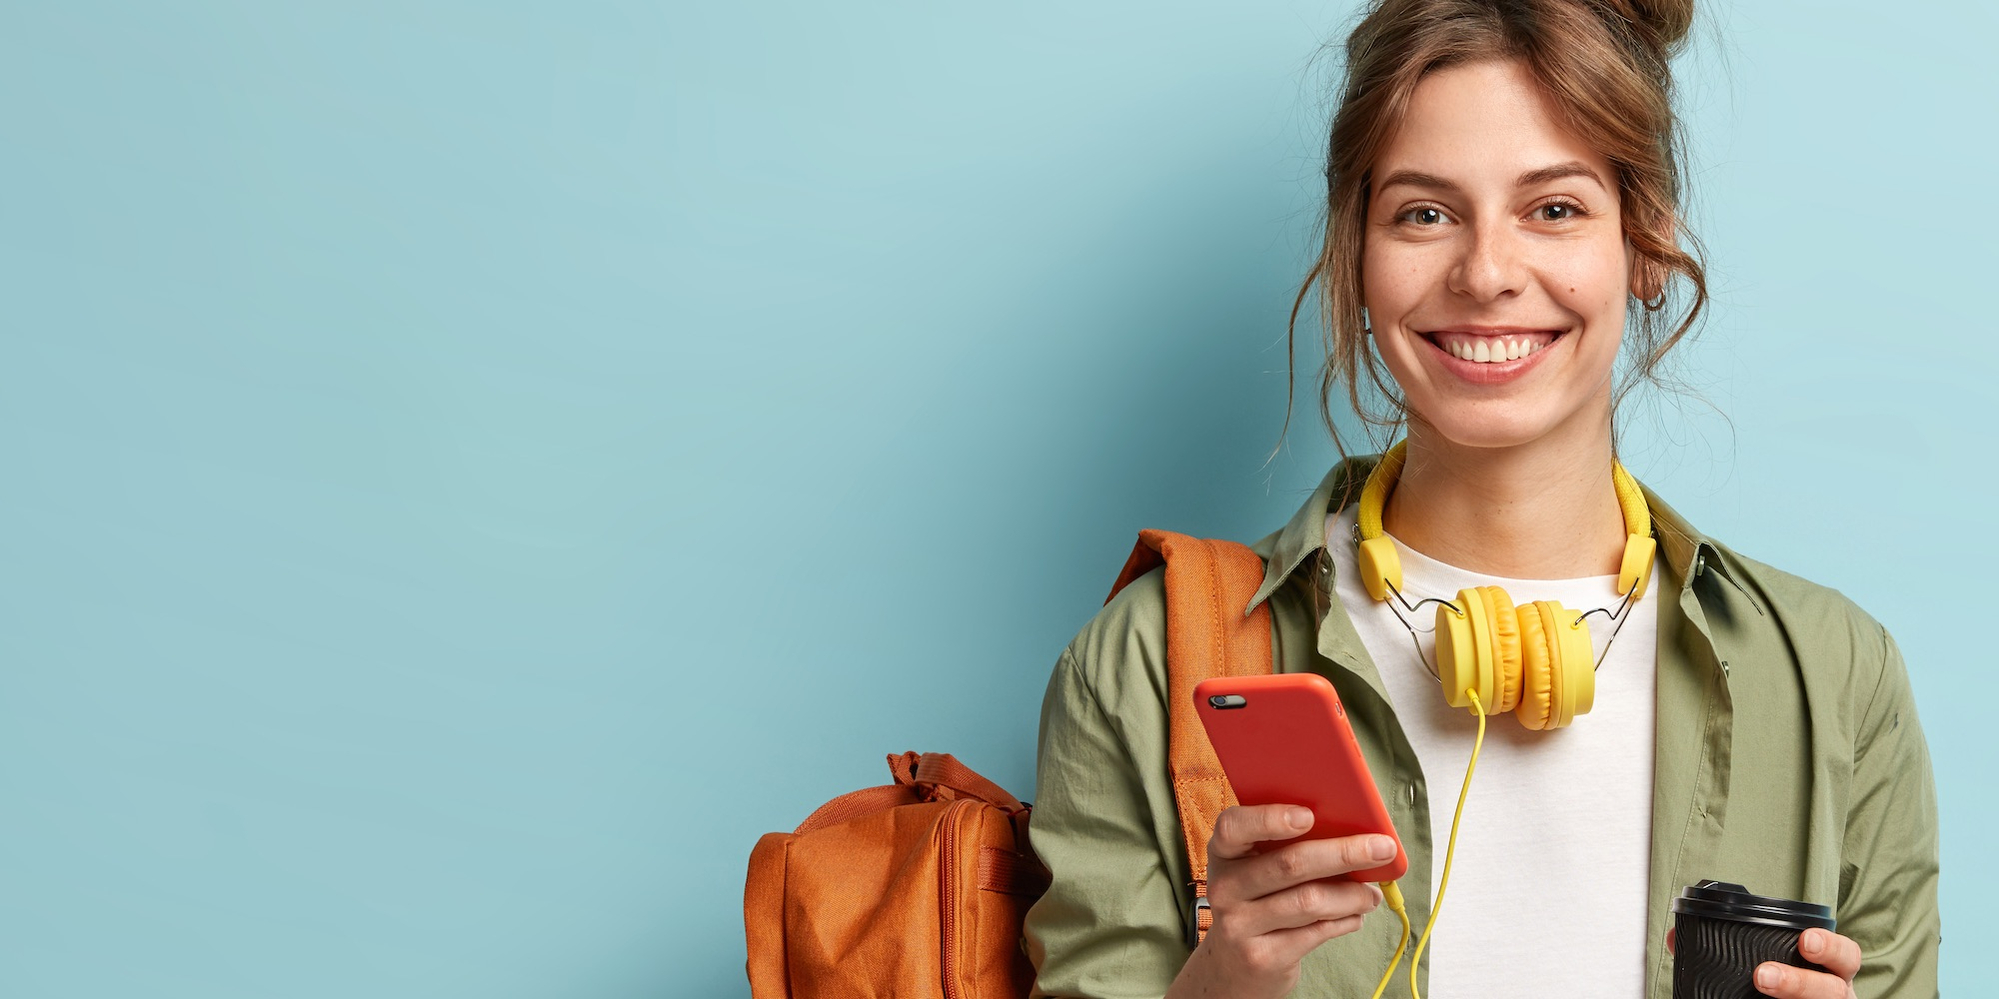 Image shows a smiling student with a rucksack over her shoulder, a coffee in one hand and her mobile device in the other.